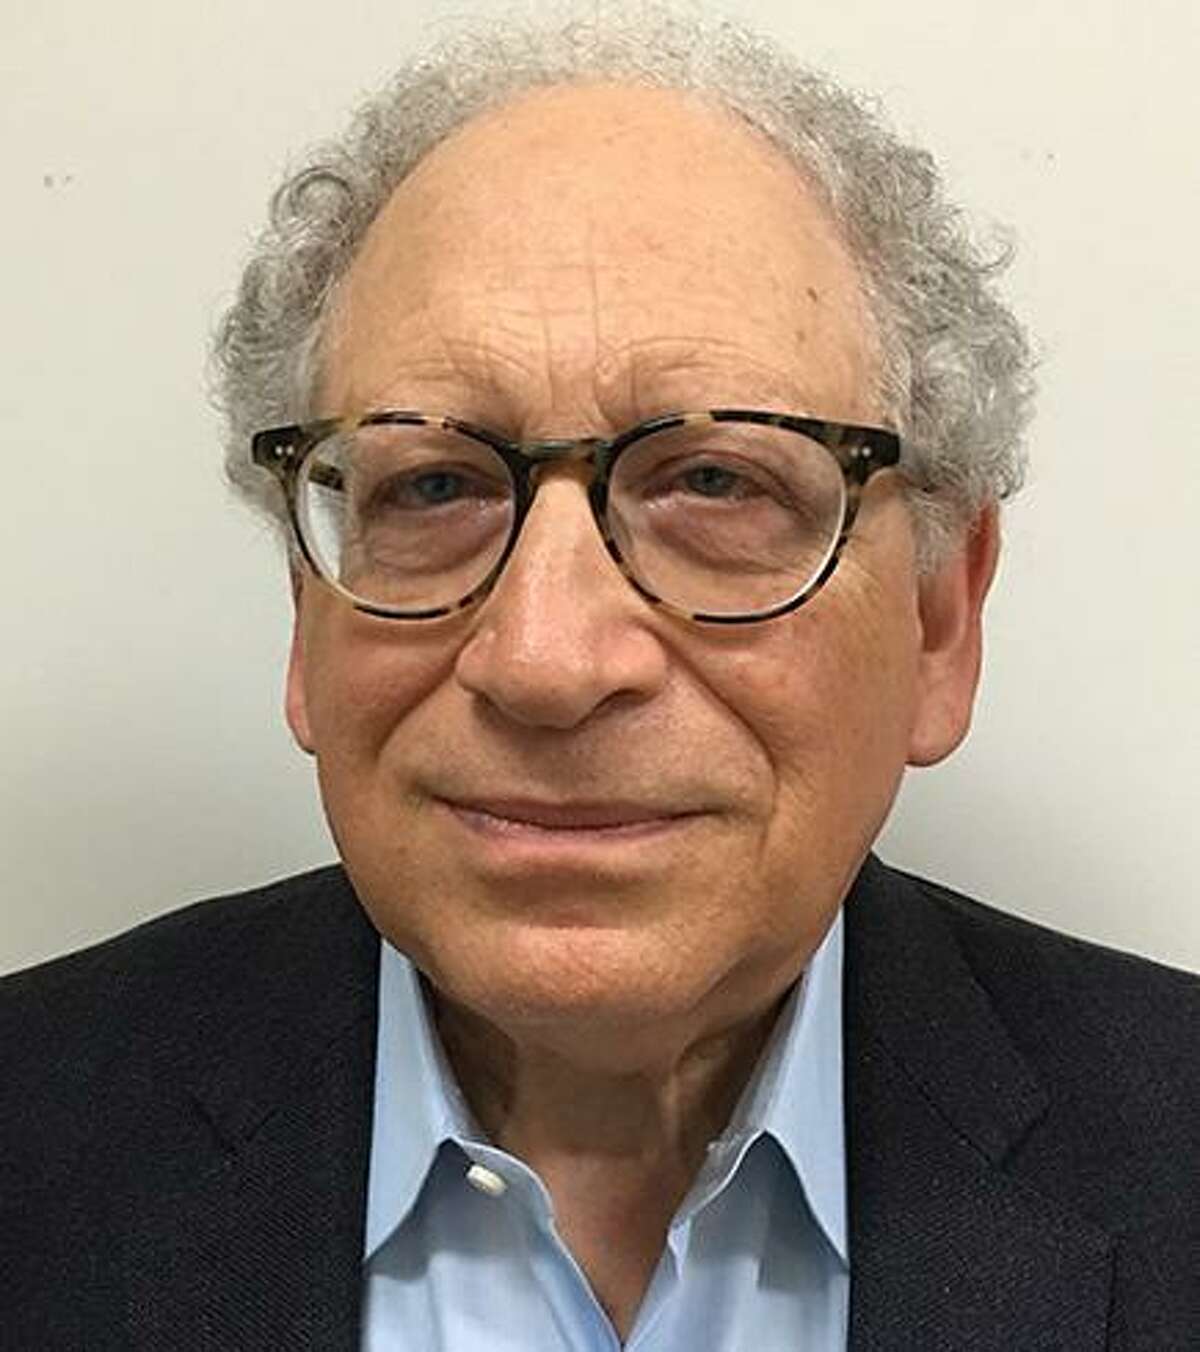 Orin Grossman, a noted musicologist at Fairfield University will describe Scott Joplin’s legacy, and the composer’s influence in Grossman’s presentation, “From Ragtime to Stride, American Music Comes of Age” to the members of the New Canaan Men’s Club on Zoom March 5, at 10 a.m.